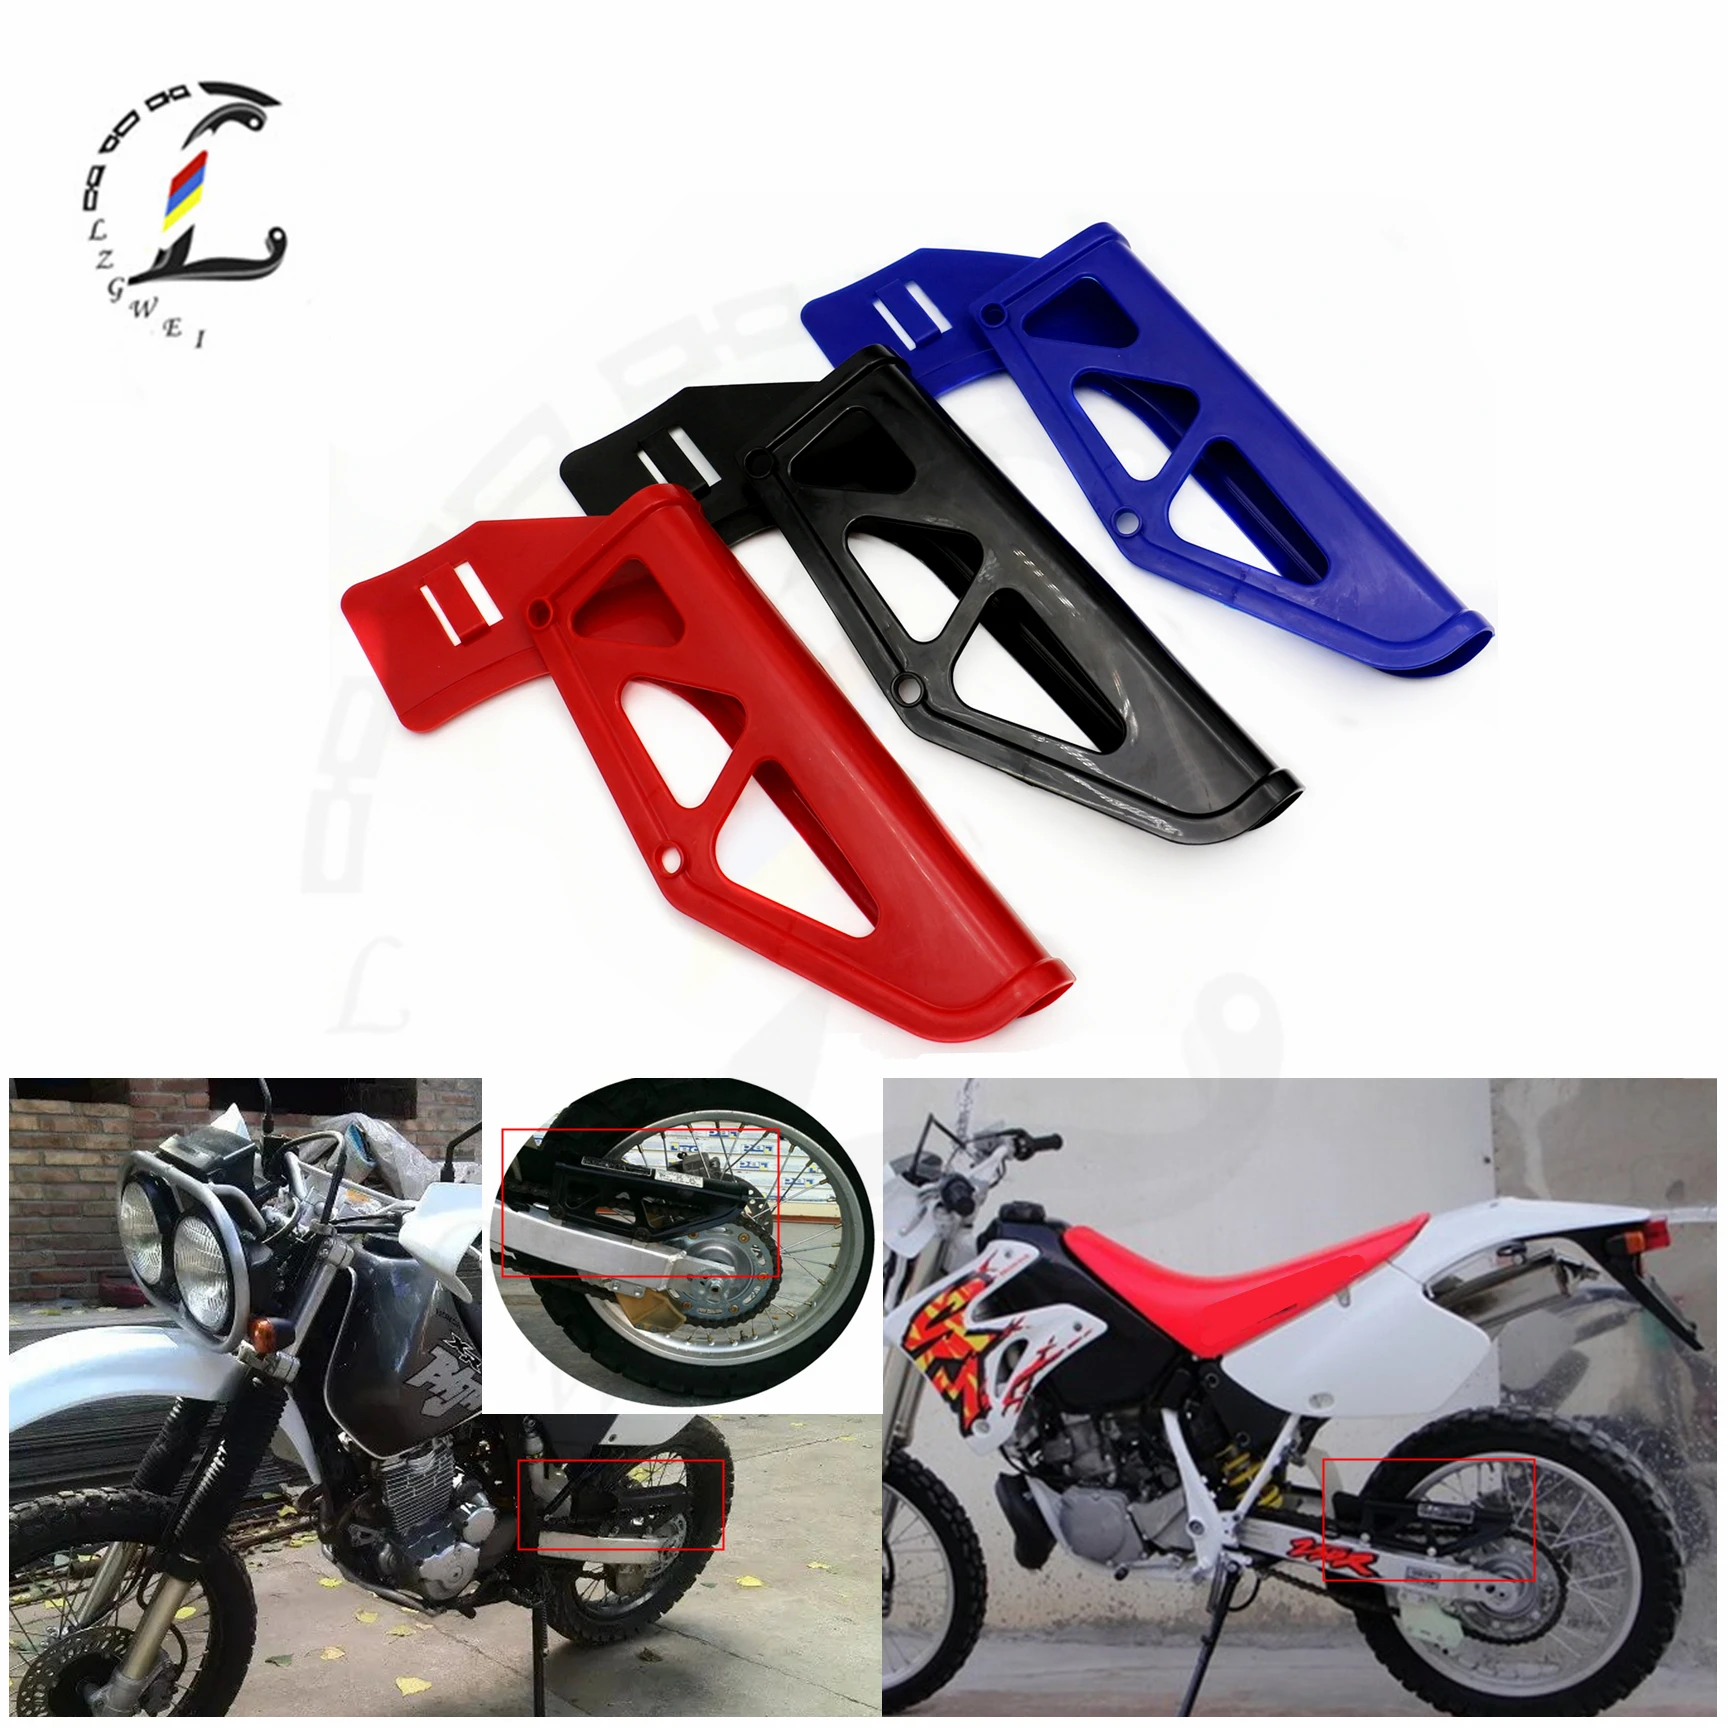 Motorcycle Chain Cover Sprocket Mudguard For Honda XR250  XR400 XR600 XR650 High Quality Side Guard Cover Protector number plate frame